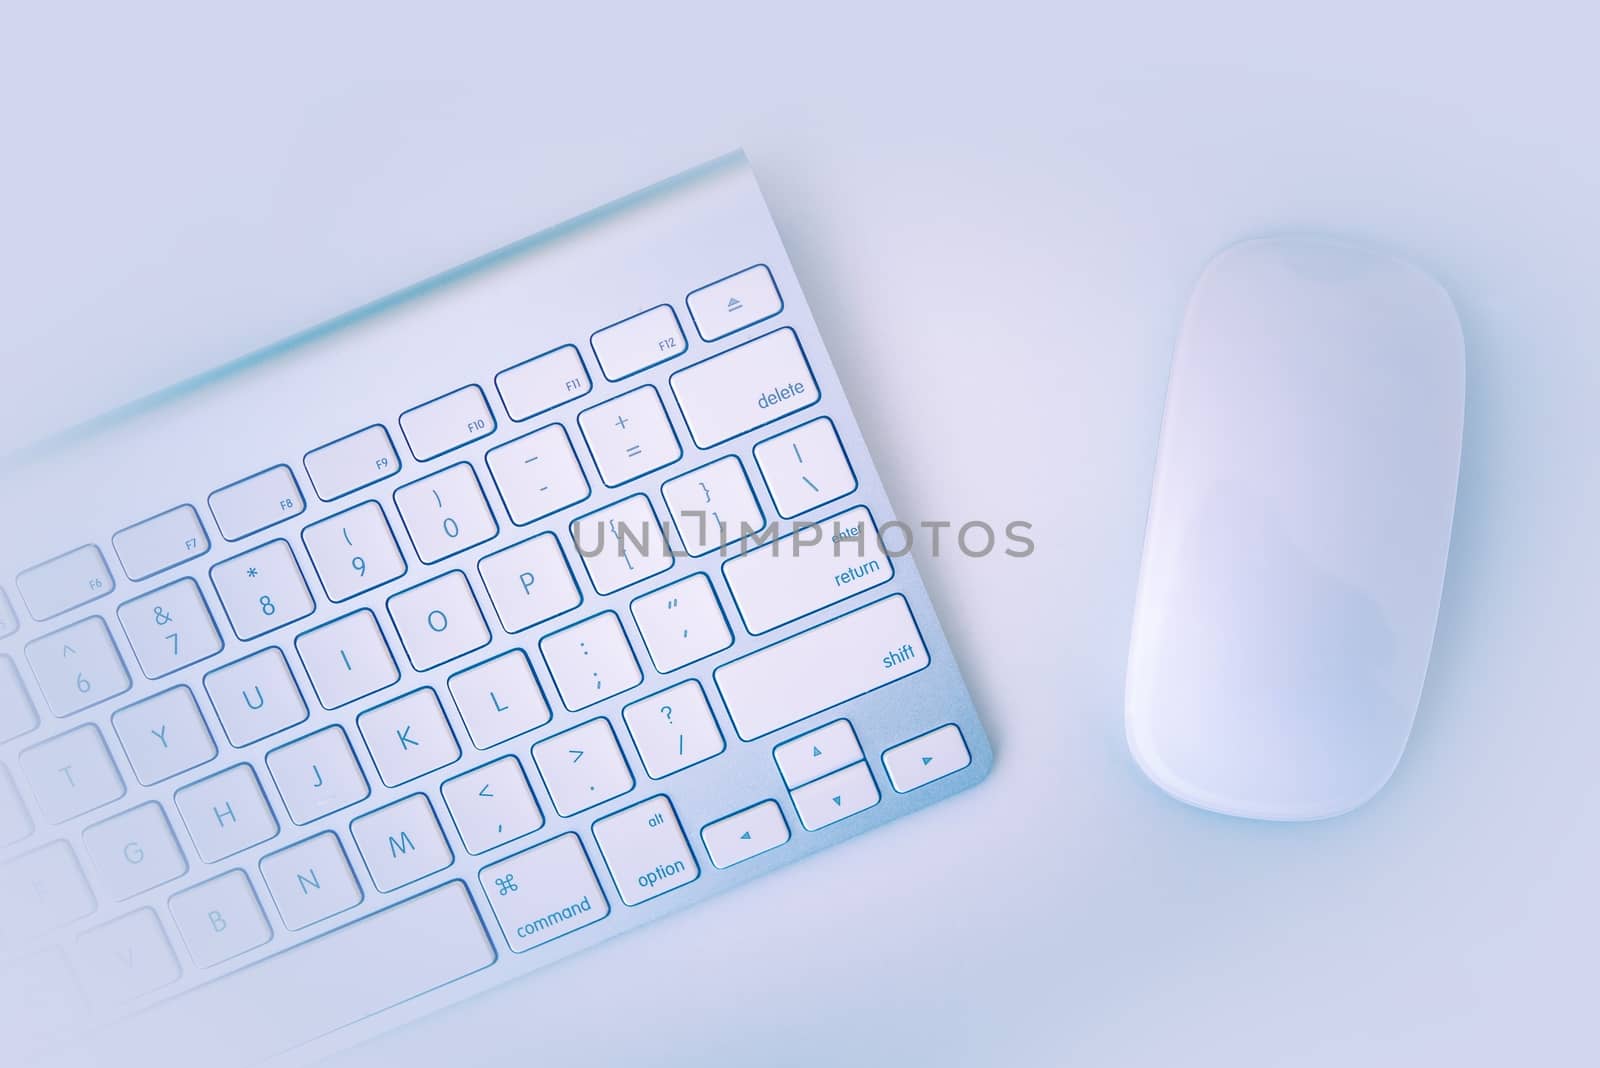 Keyboard and Mouse by welcomia